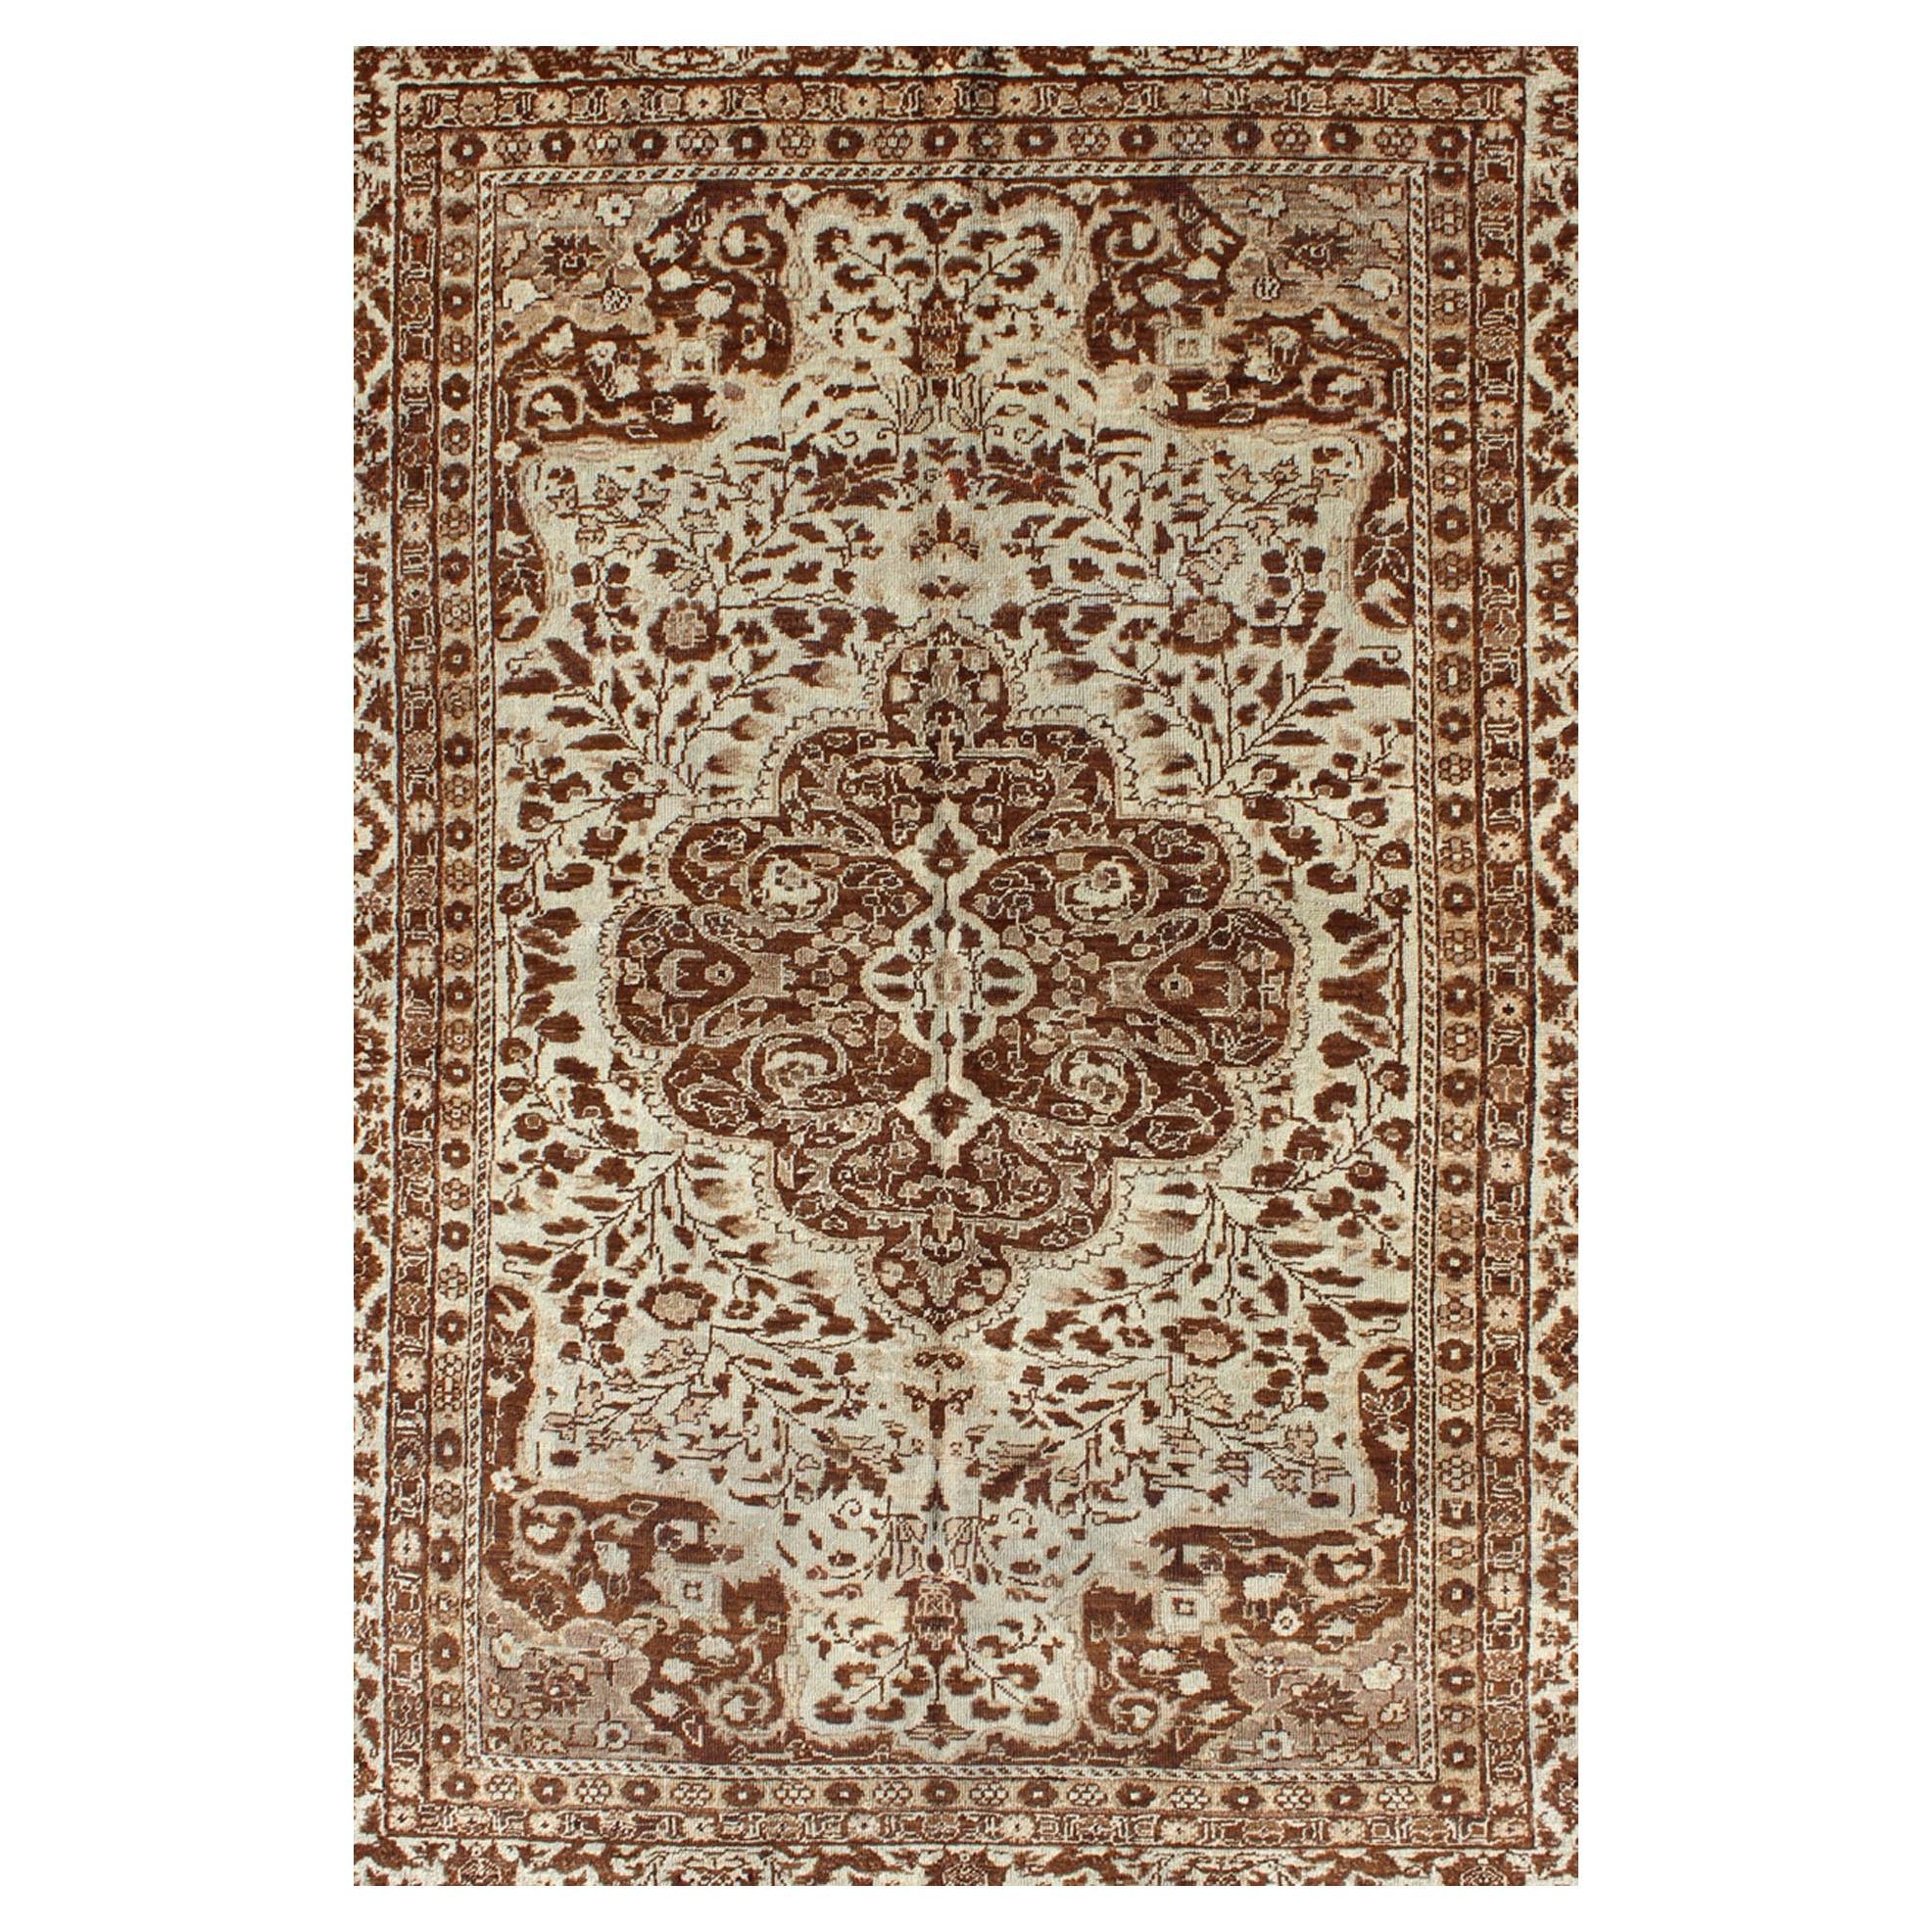 Turkish Antique Medallion Sivas with Leaflet Motifs in Neutral Browns and Cream For Sale